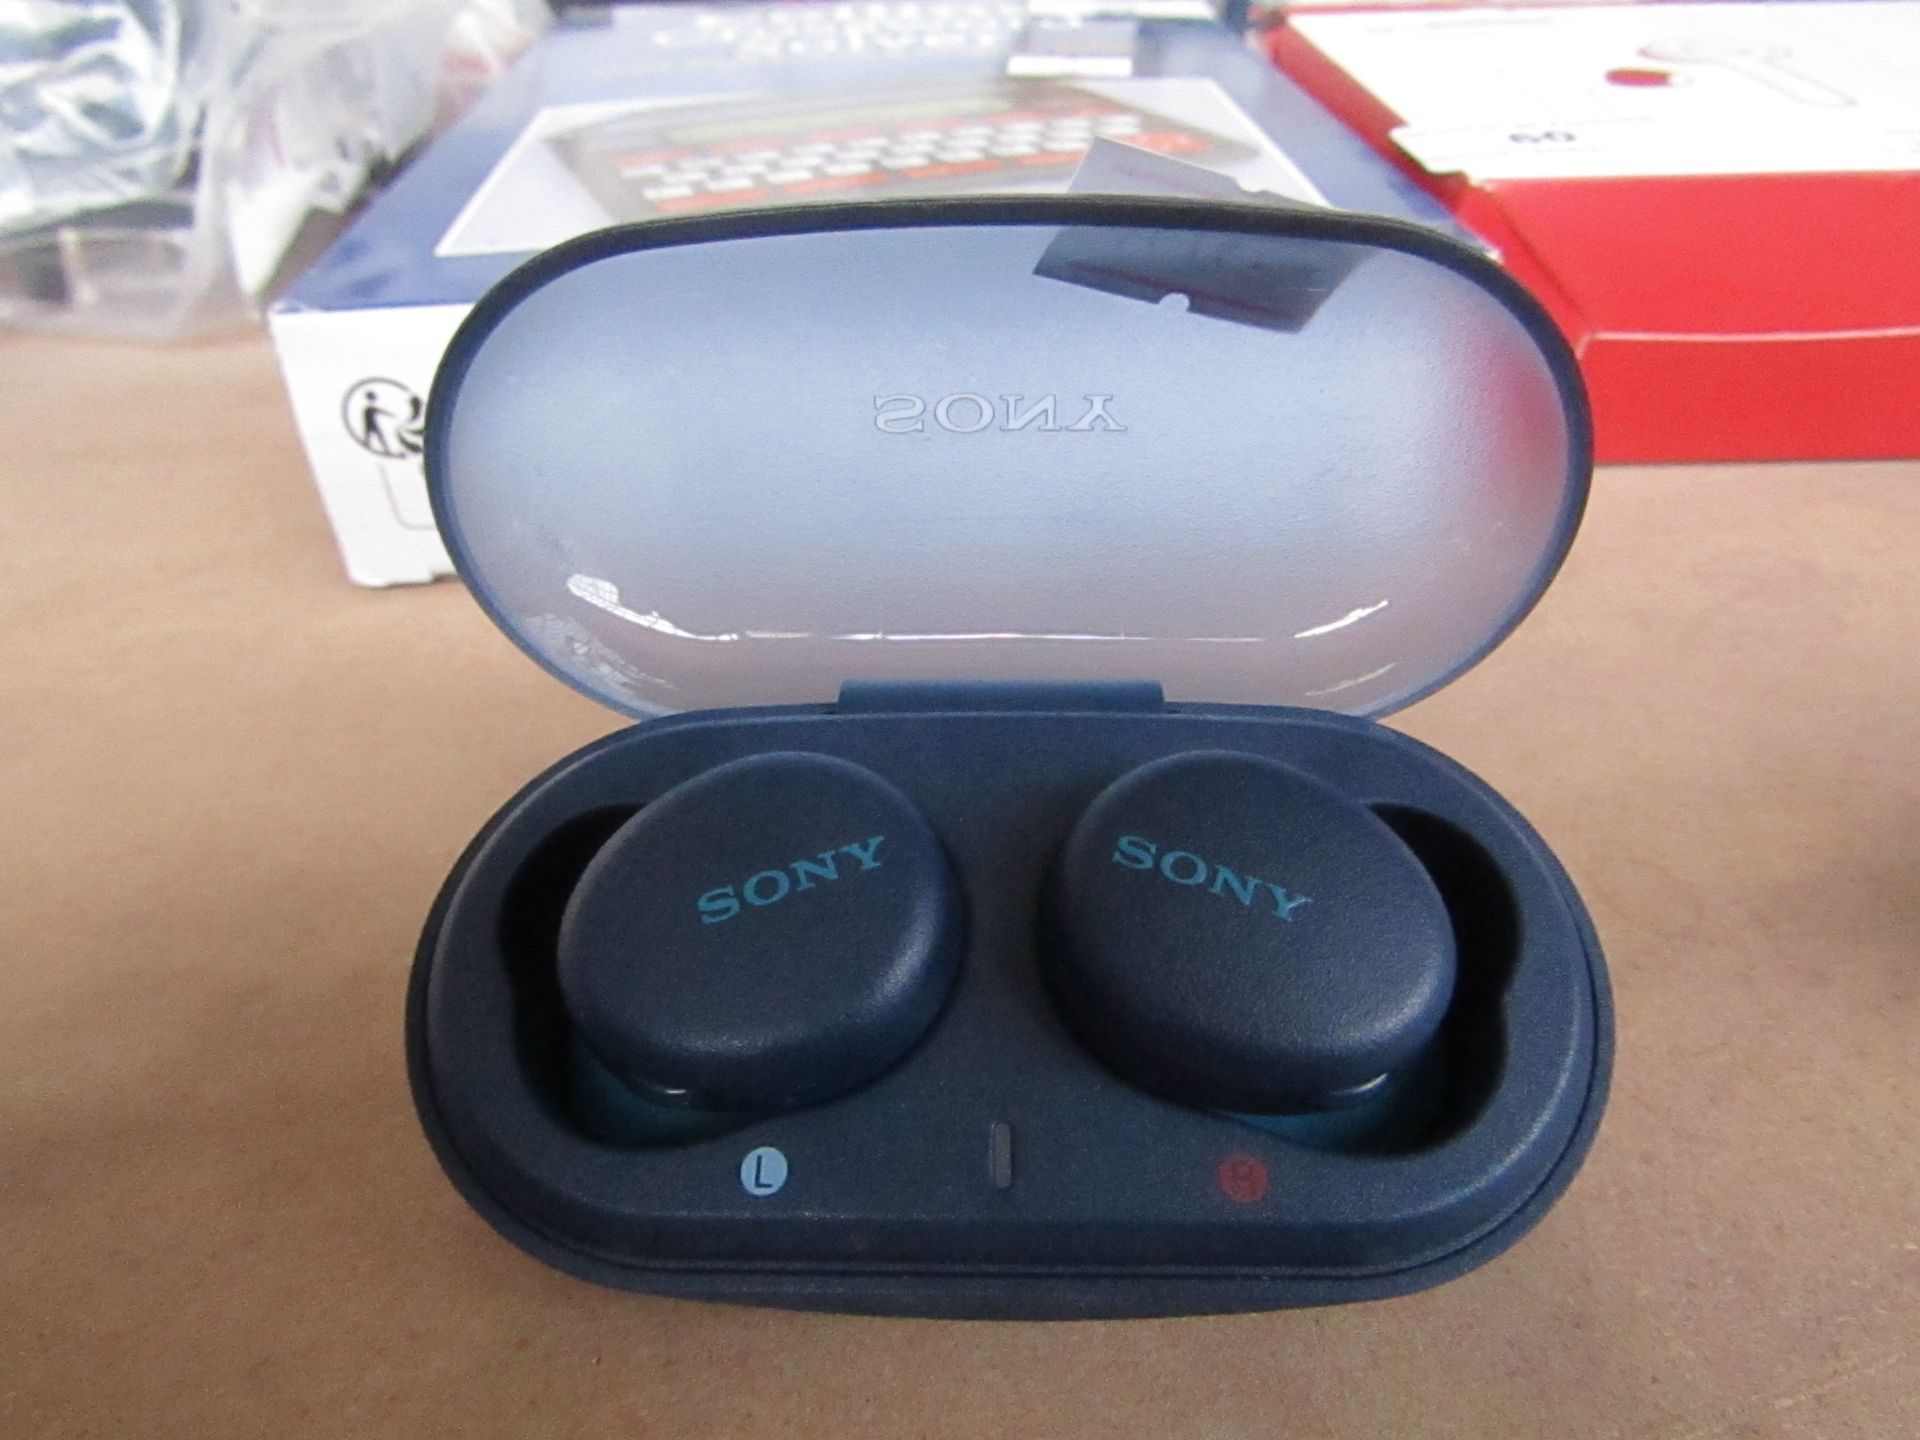 Sony earbuds with case, unchecked.